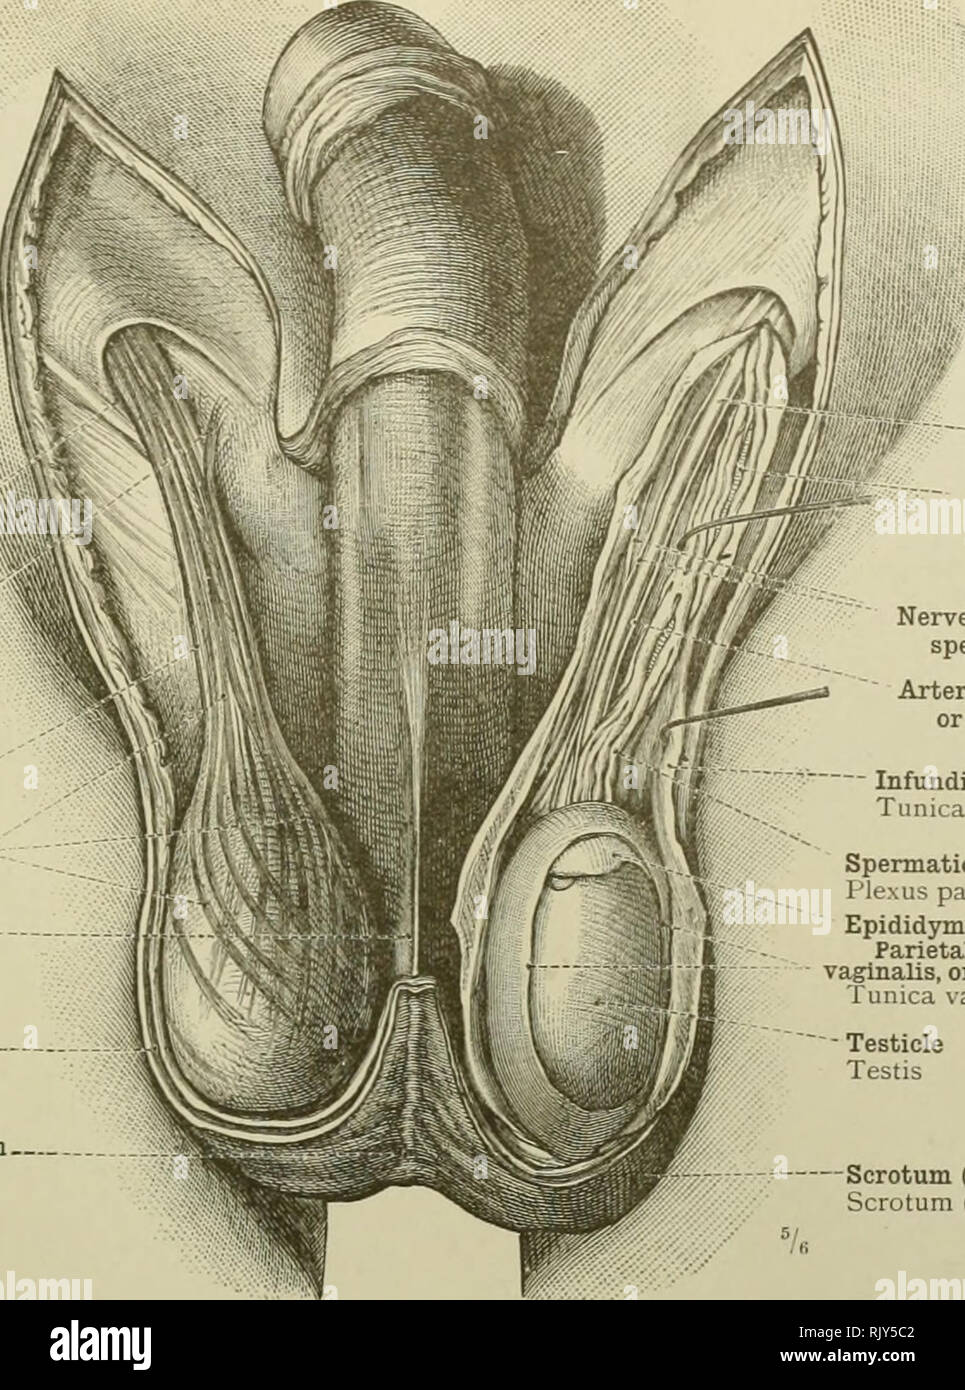 . An atlas of human anatomy for students and physicians. Anatomy. MALE REPRODUCTIVE ORGANS 501 I External or superficial abdominal ring- Annulus inguinalis sub cutaneus Accessory slip of origin of the cremaster muscle Spermatic cord Funiculus spermaticus, Cremaster muscle - M. cremaster I Septum of the scrotum Septum scroti Dartos tunic Tunica dartob — Raphe of the scrotum.. Raphe scroti. Vas deferens Ductus deferens Spermatic artery A testicularis (spermatica interna) Nerve filaments of the spermatic plexus Artery of the vas deferens, or deferential artery A deferentialis — Infundibuliform fa Stock Photo